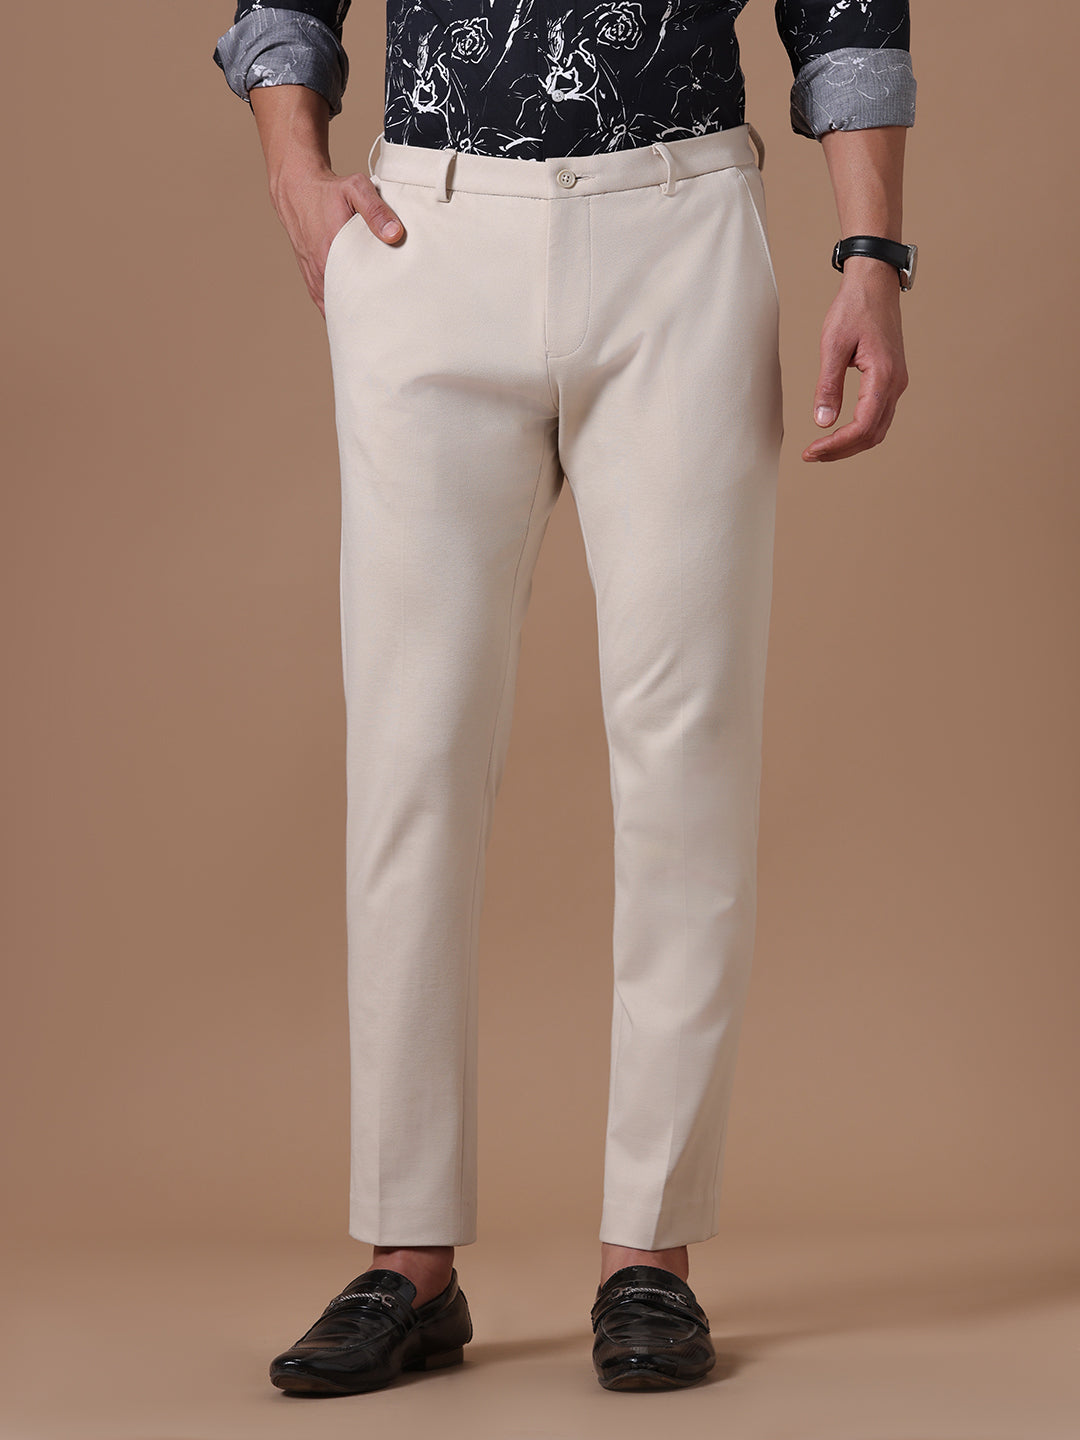 Knitted Slim Fit Light Beige Formal Stretch Trouser (TAHLIA)